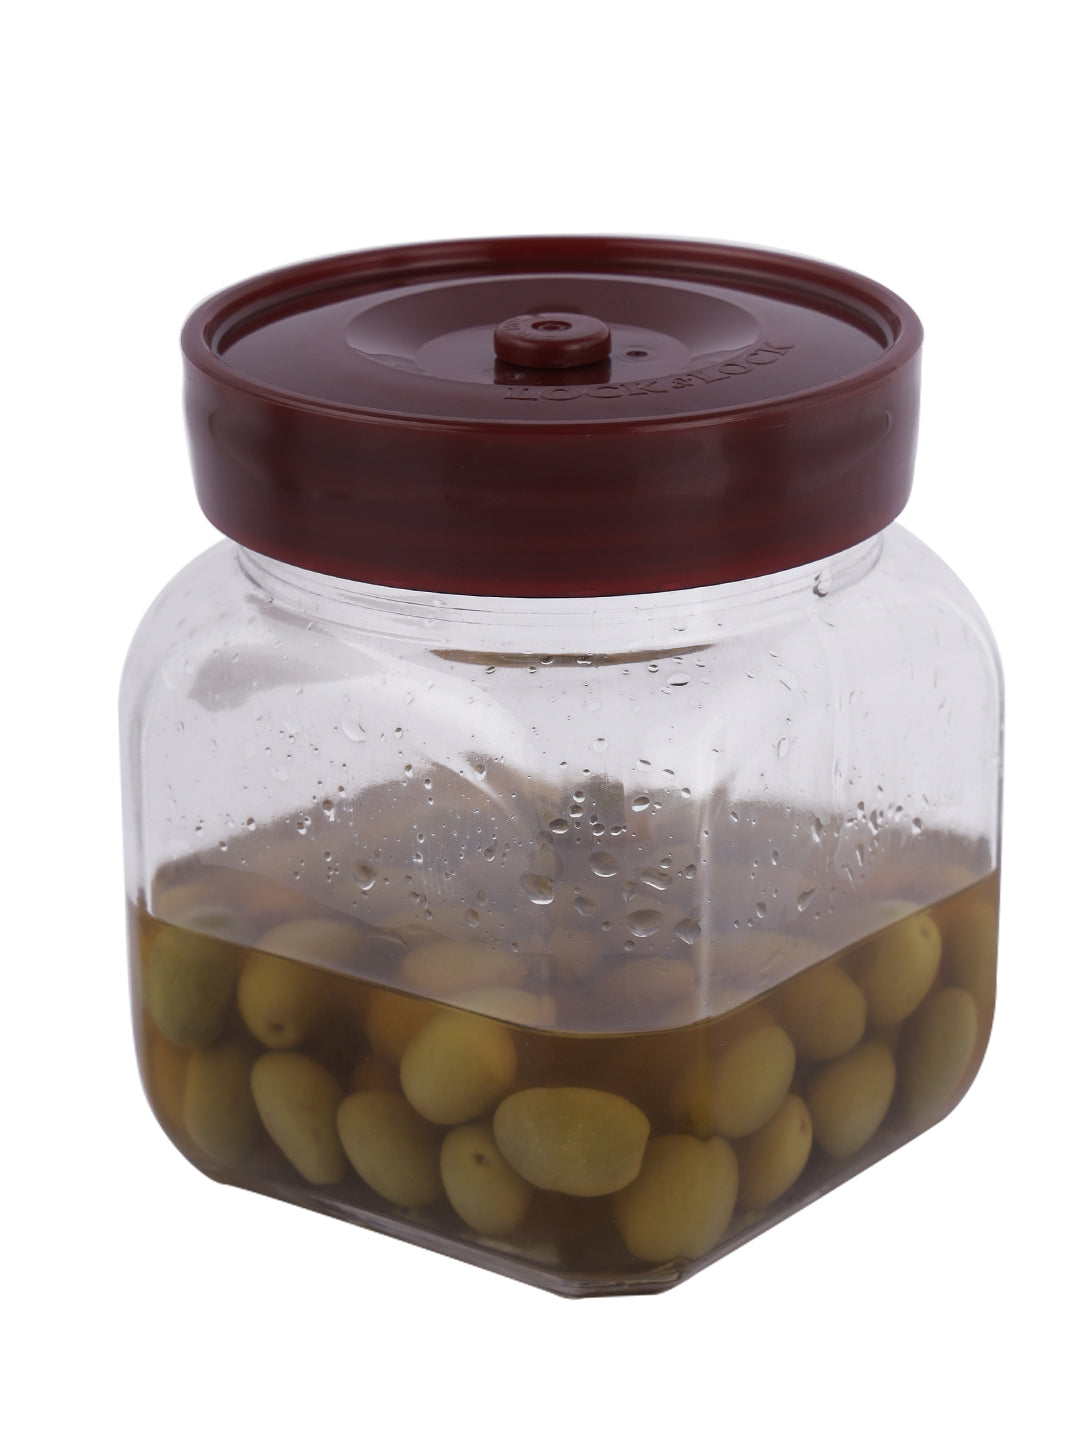 SQUARE CANISTER - 900ML